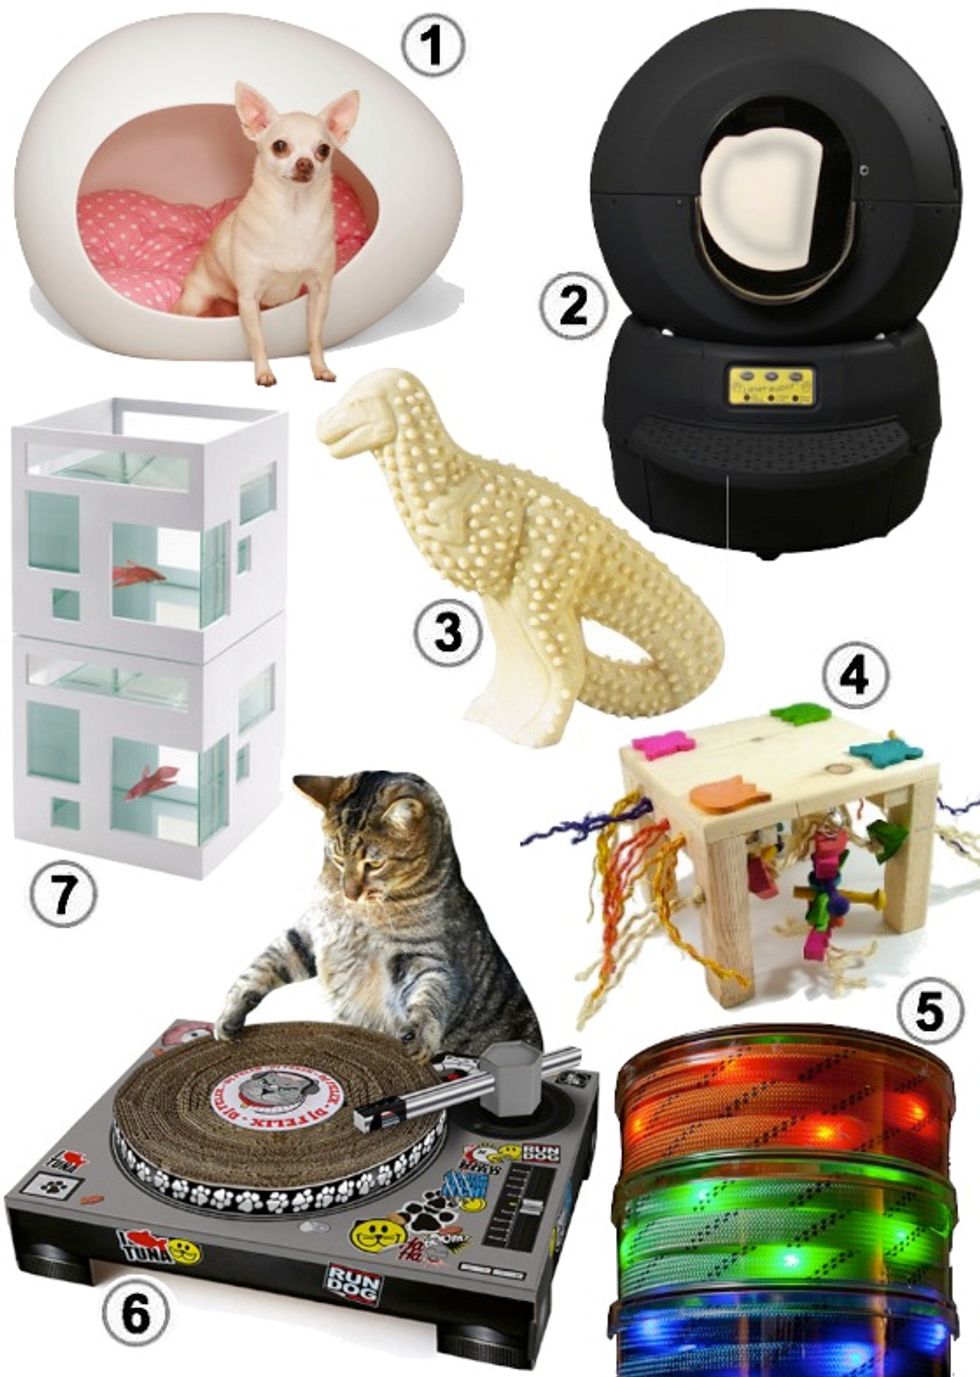 Look of the Week: Top Gifts for Bay Area Pets & Pet Lovers